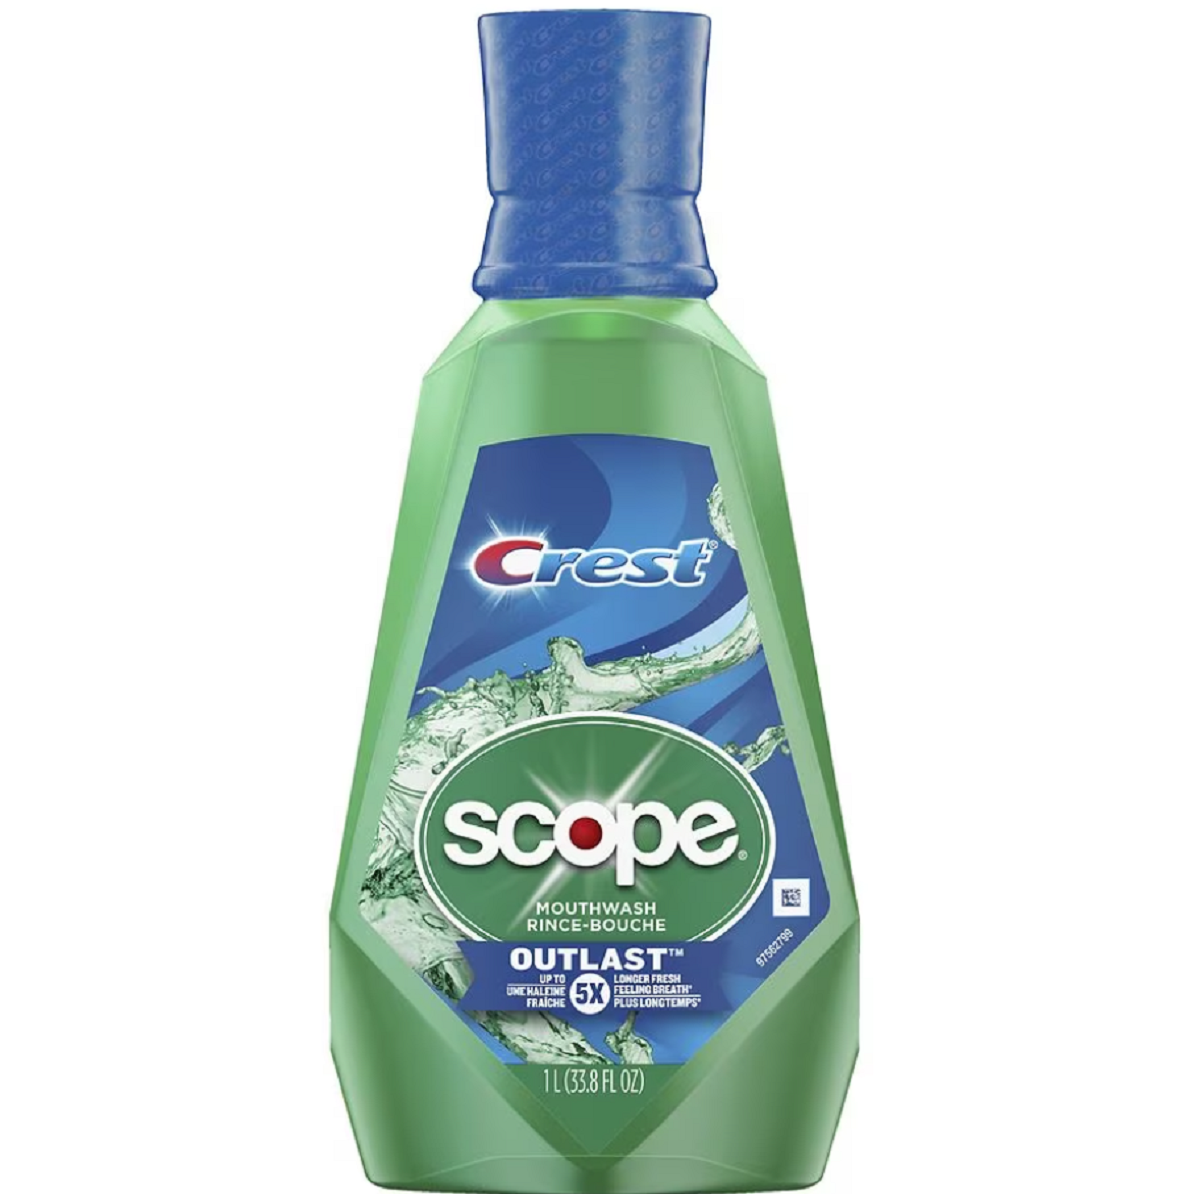 $1 Off (1) Crest Scope Mouthwash Printable Coupon